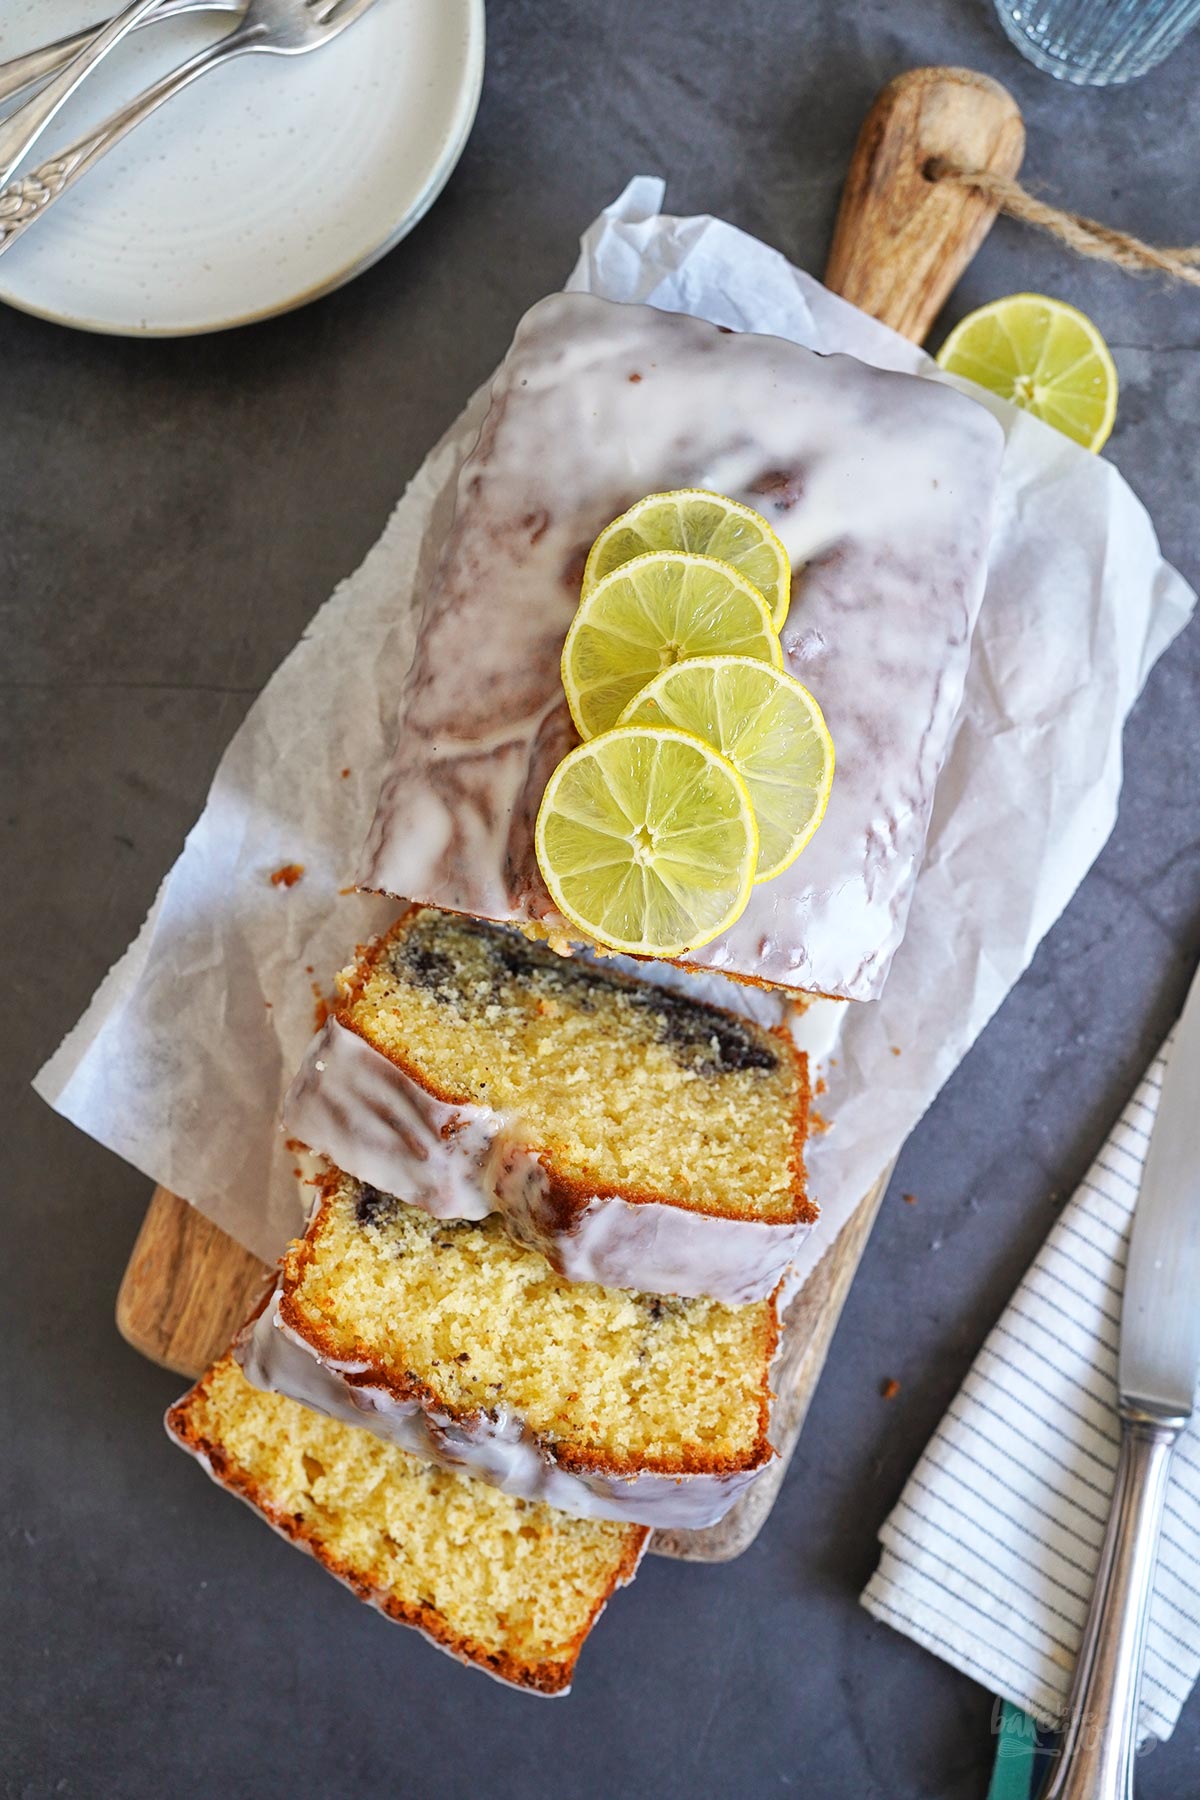 Lemon Poppy Seed Cake | Bake to the roots